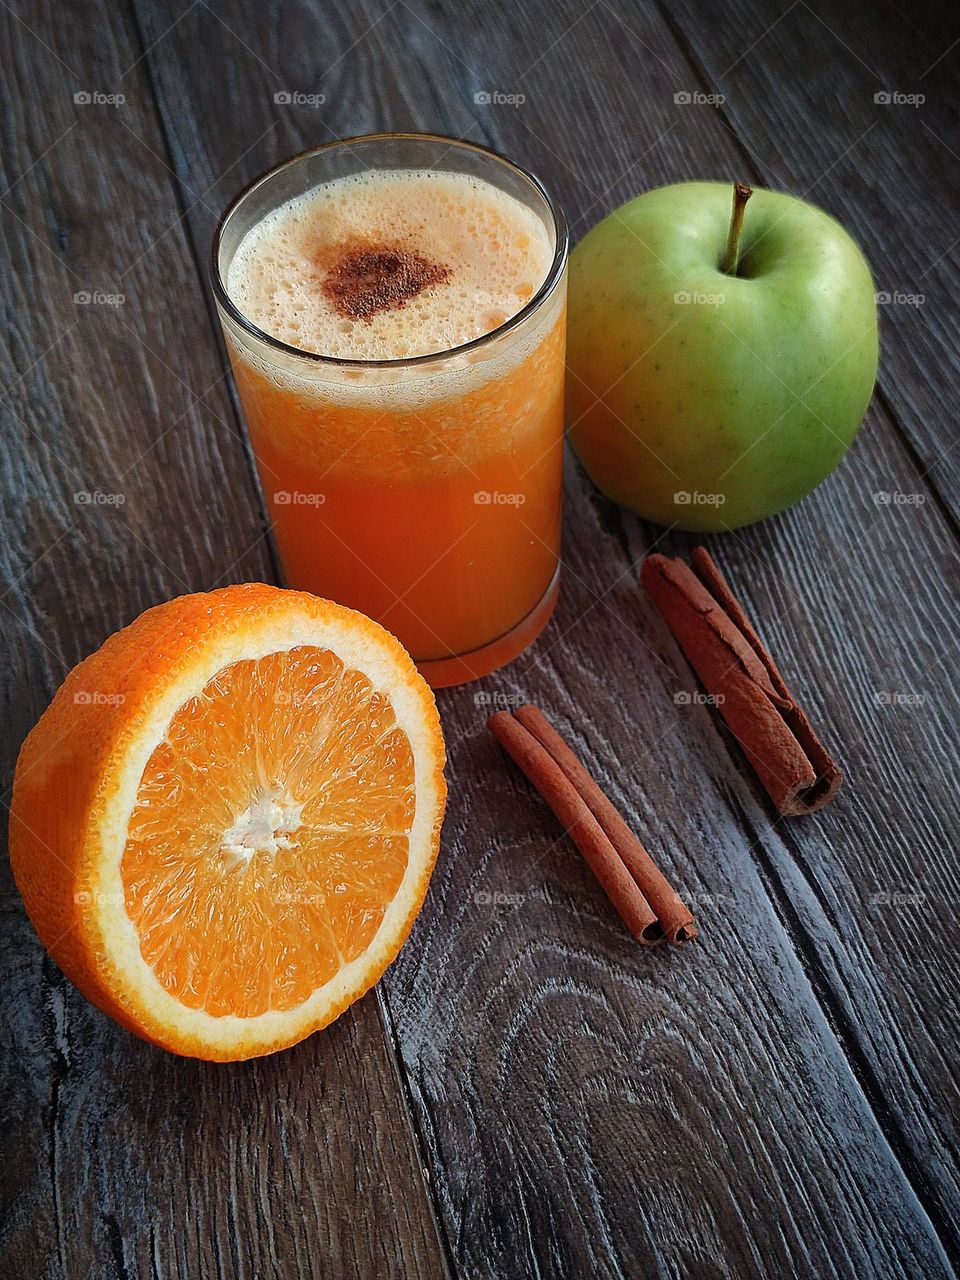 Summer treats. Beverages. On a wooden surface is a glass with an orange smoothie, on the surface of which is ground cinnamon in the form of a heart. Nearby are the ingredients: half an orange orange; green apple and two brown cinnamon sticks